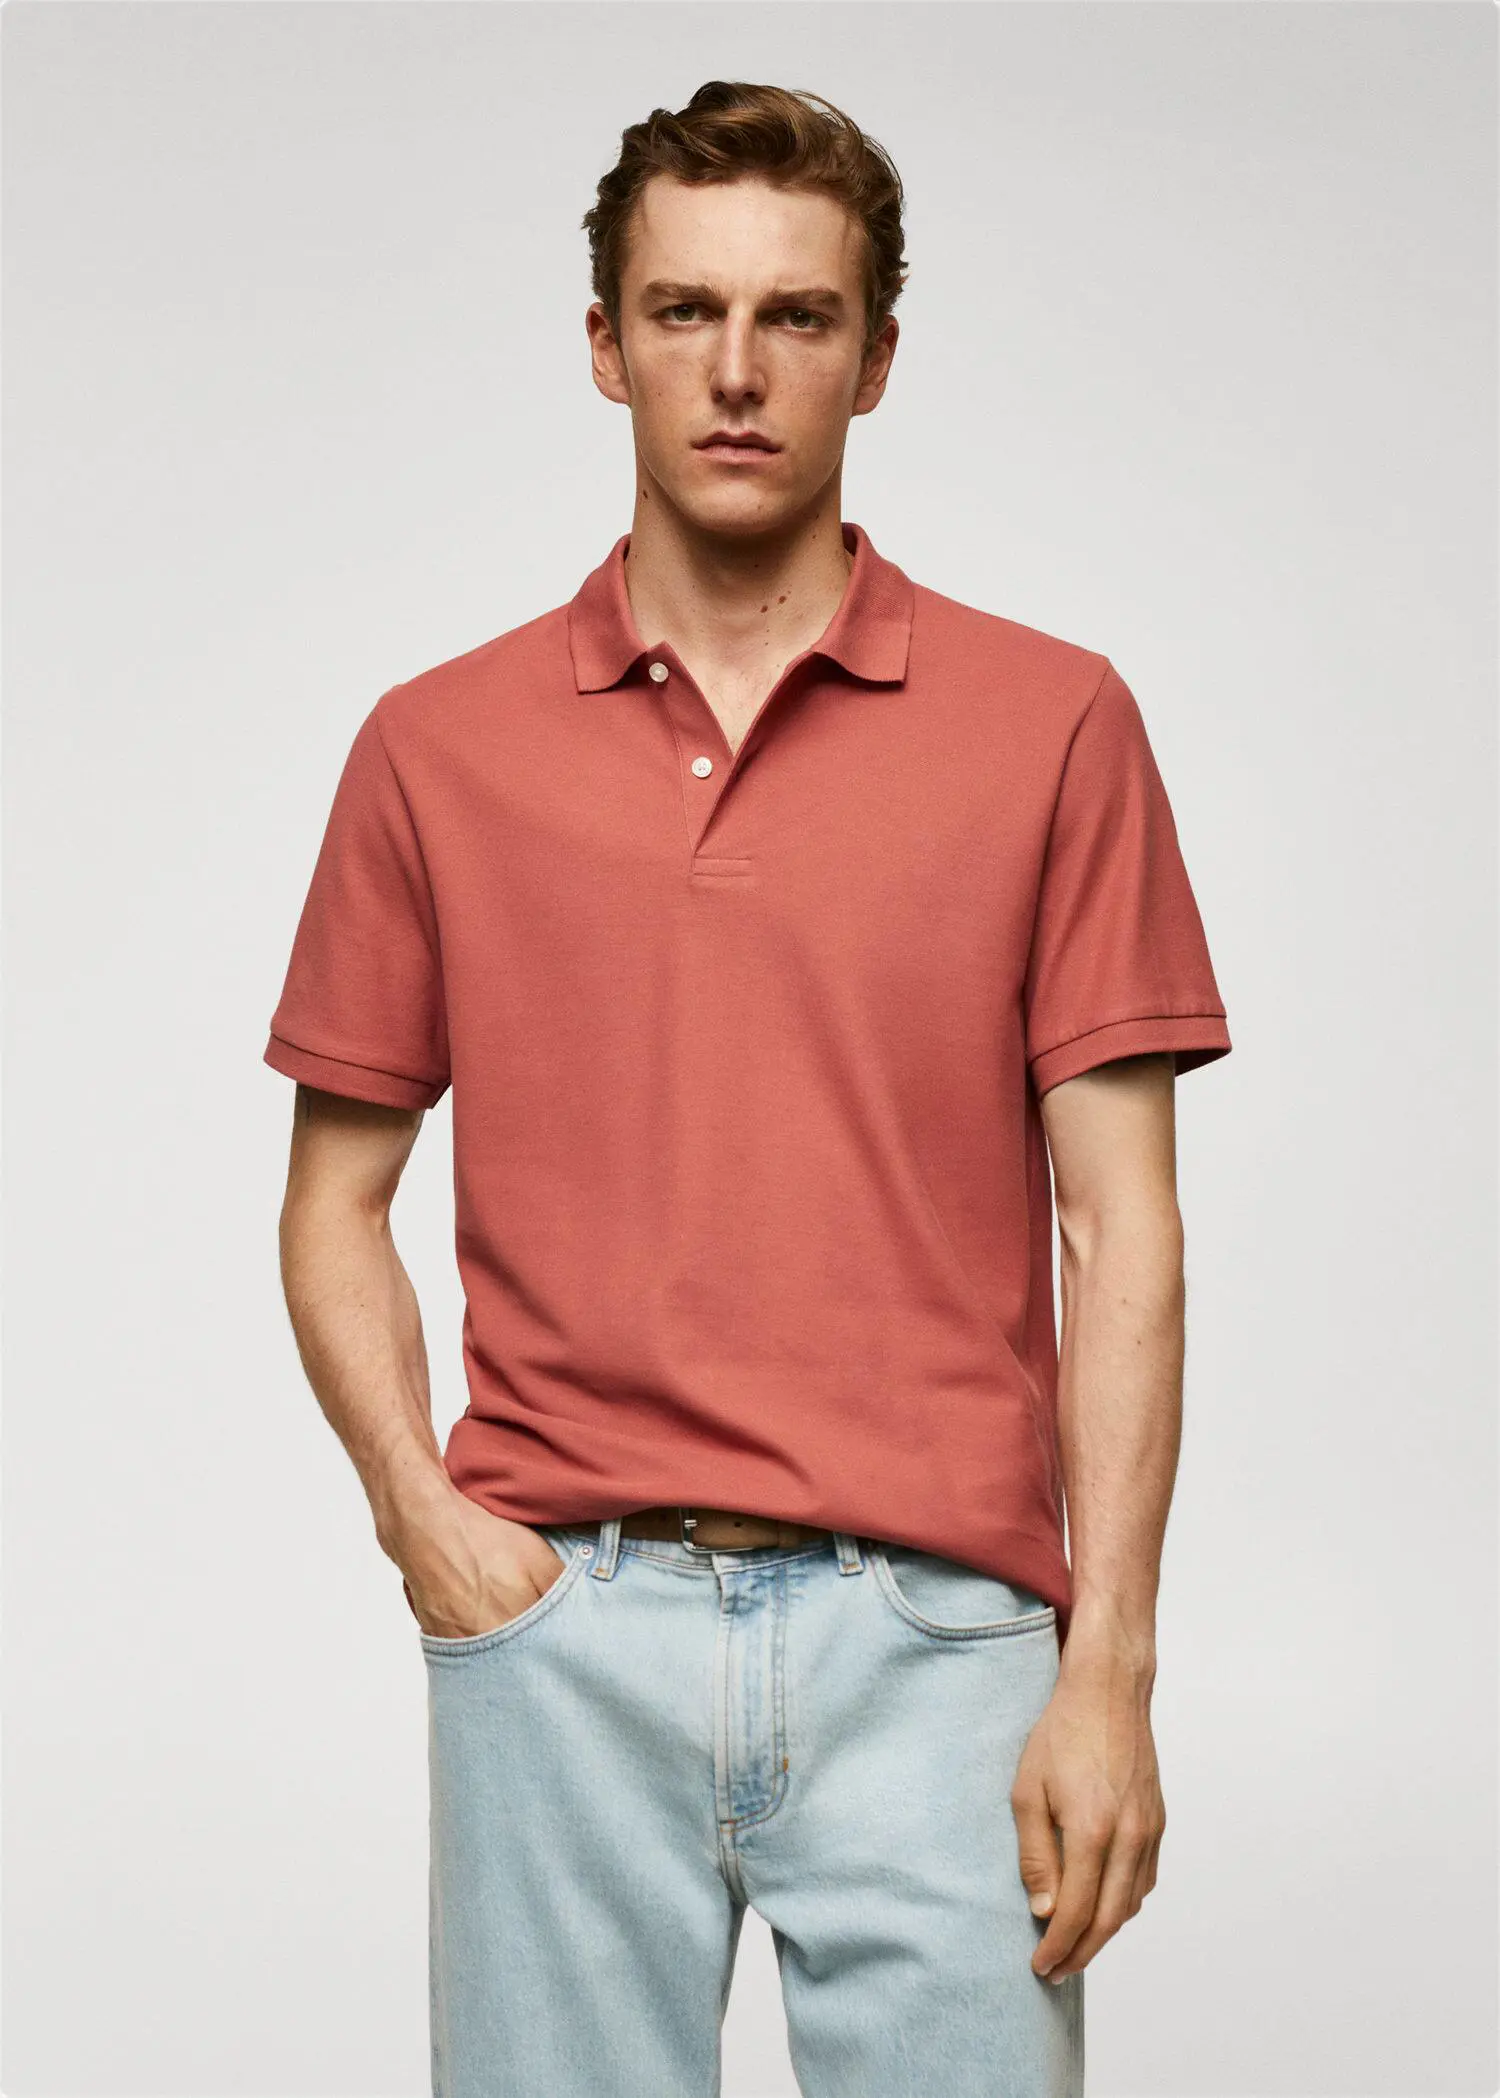 Mango 100% cotton pique polo shirt. a man wearing a red polo shirt and blue jeans. 